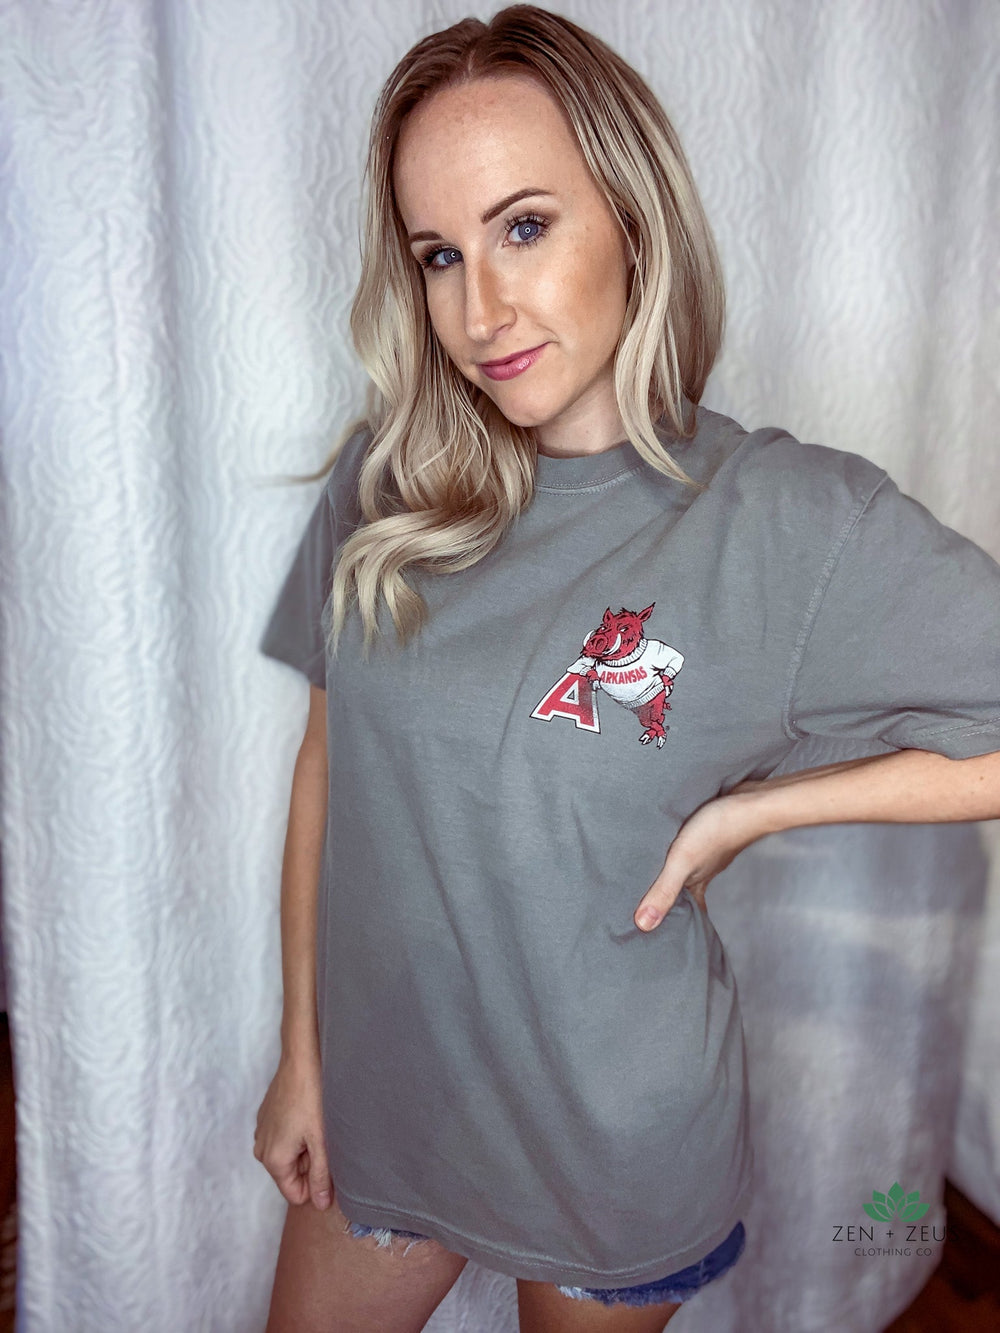 Vintage Hog Leaning on ‘A’ Gameday Tee - Graphic Tee